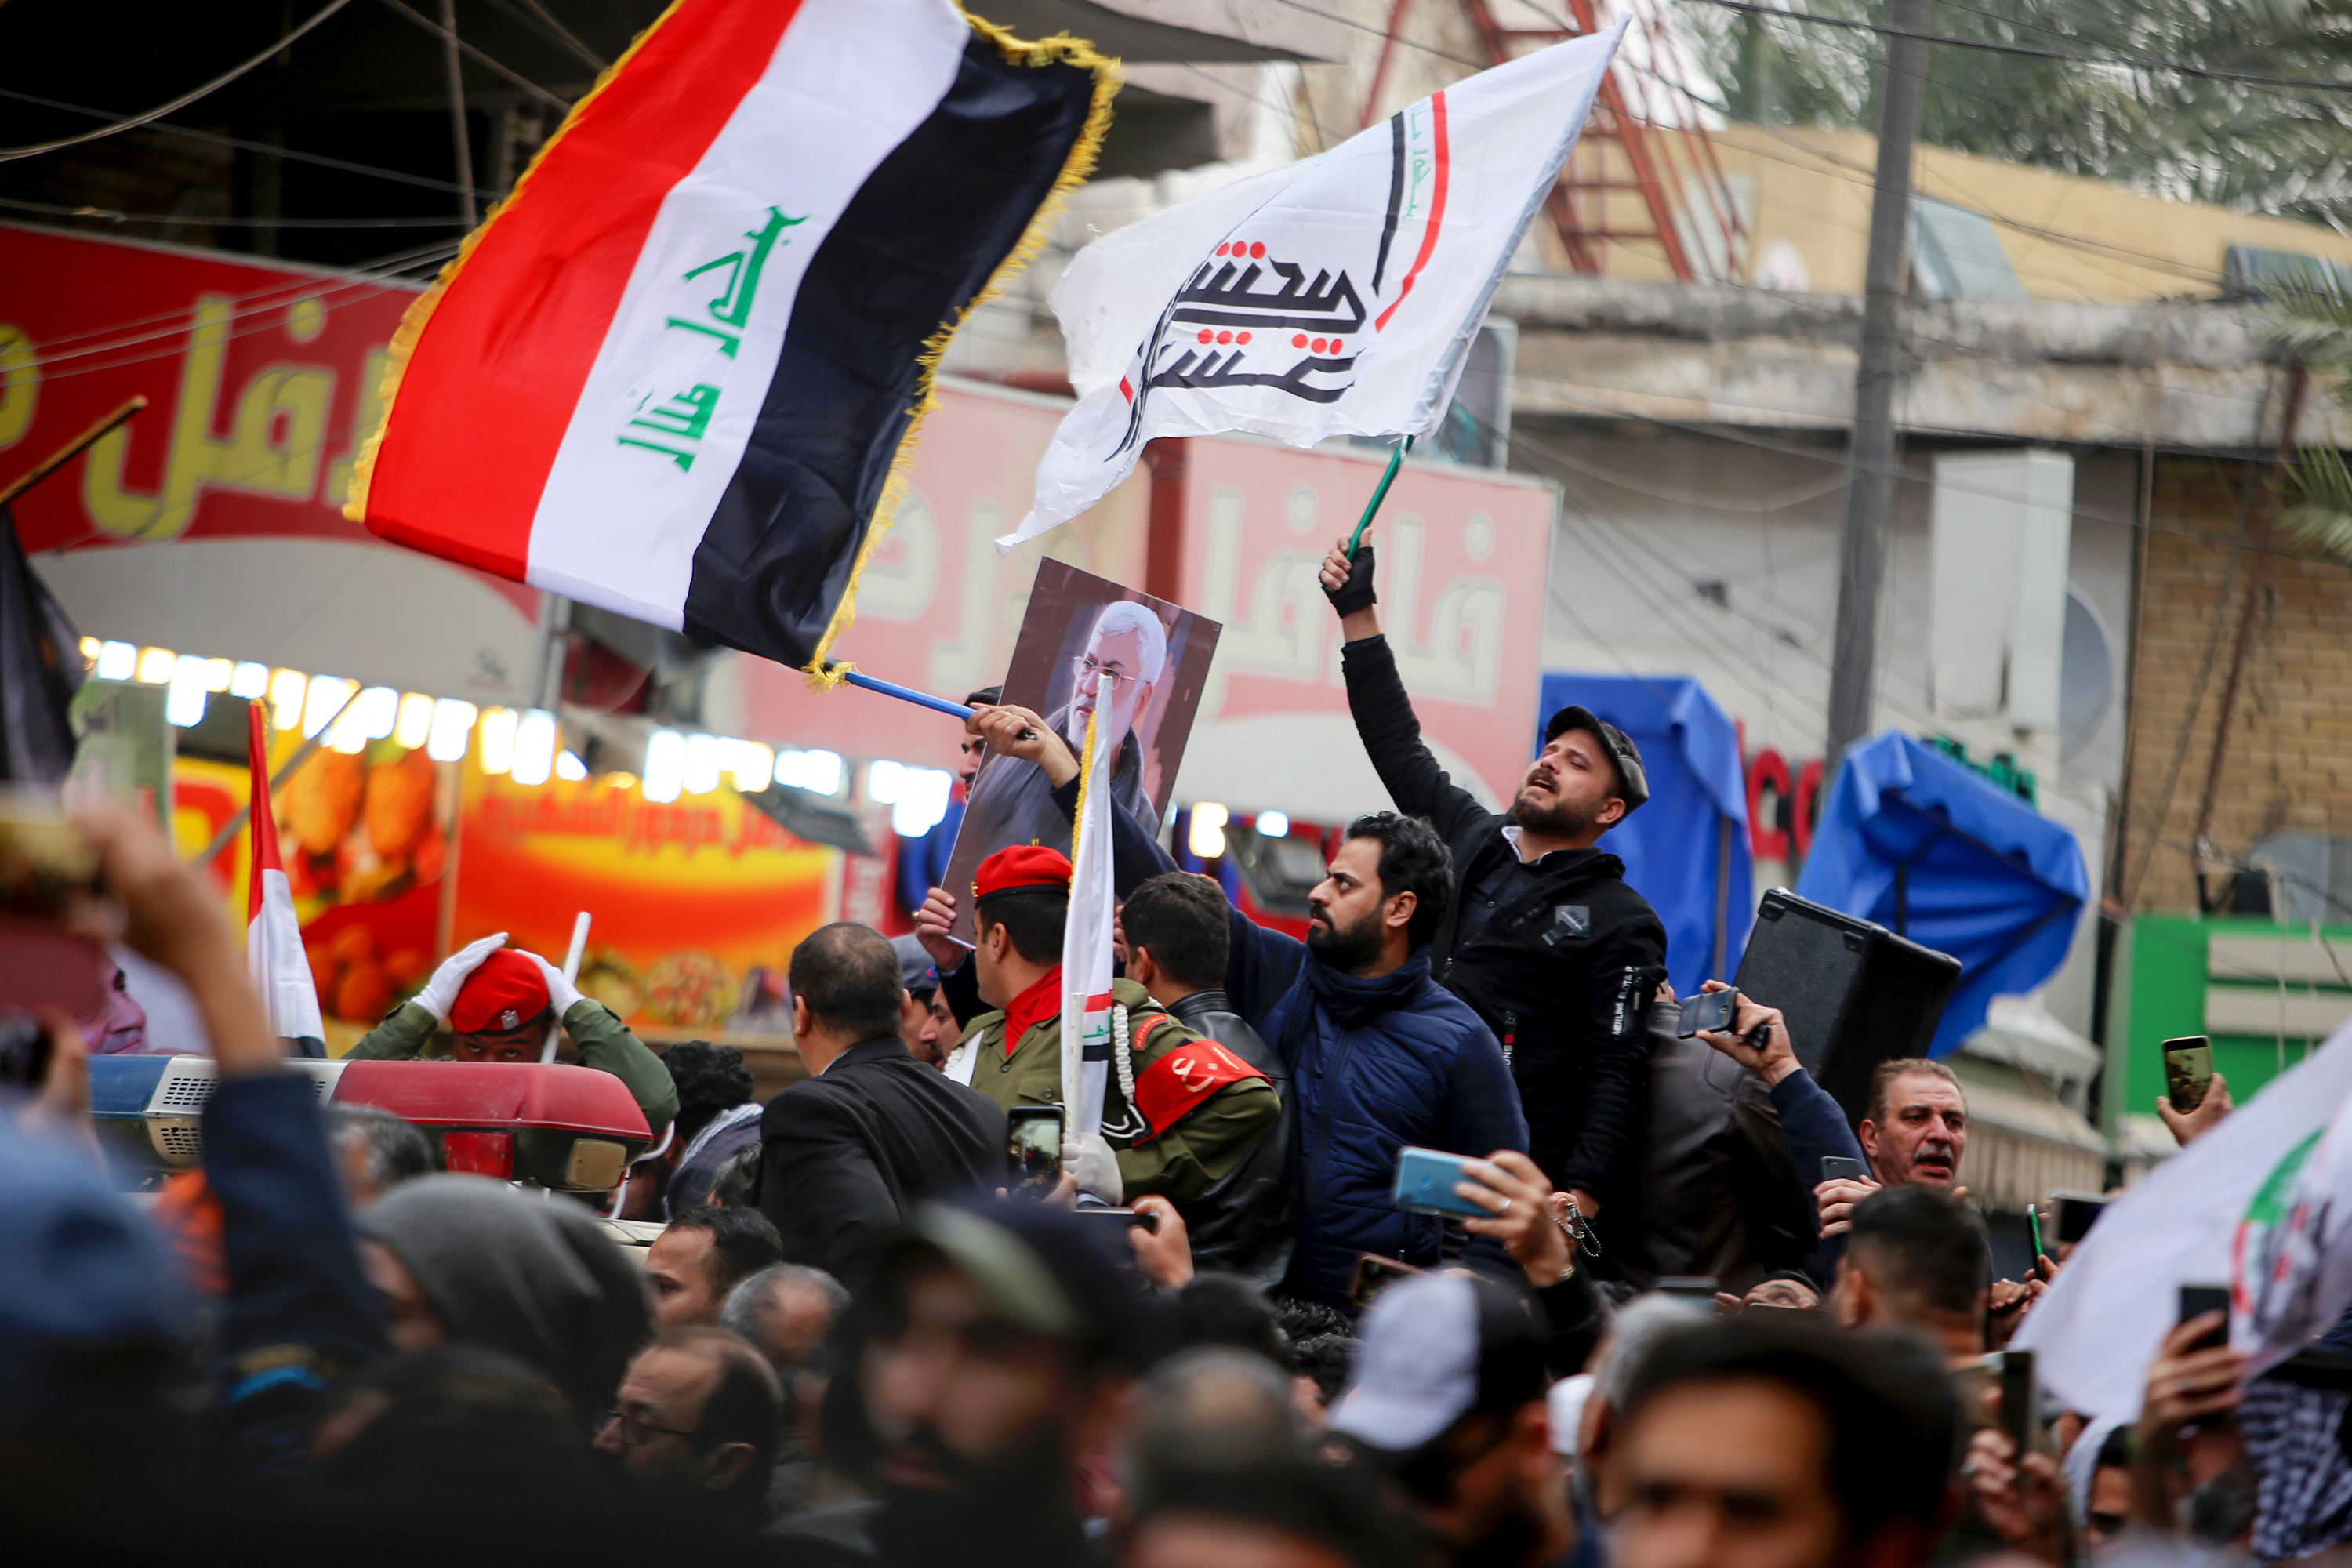 Mourners at a funeral procession in Kadhimiya, Baghdad, on January 4, 2020.